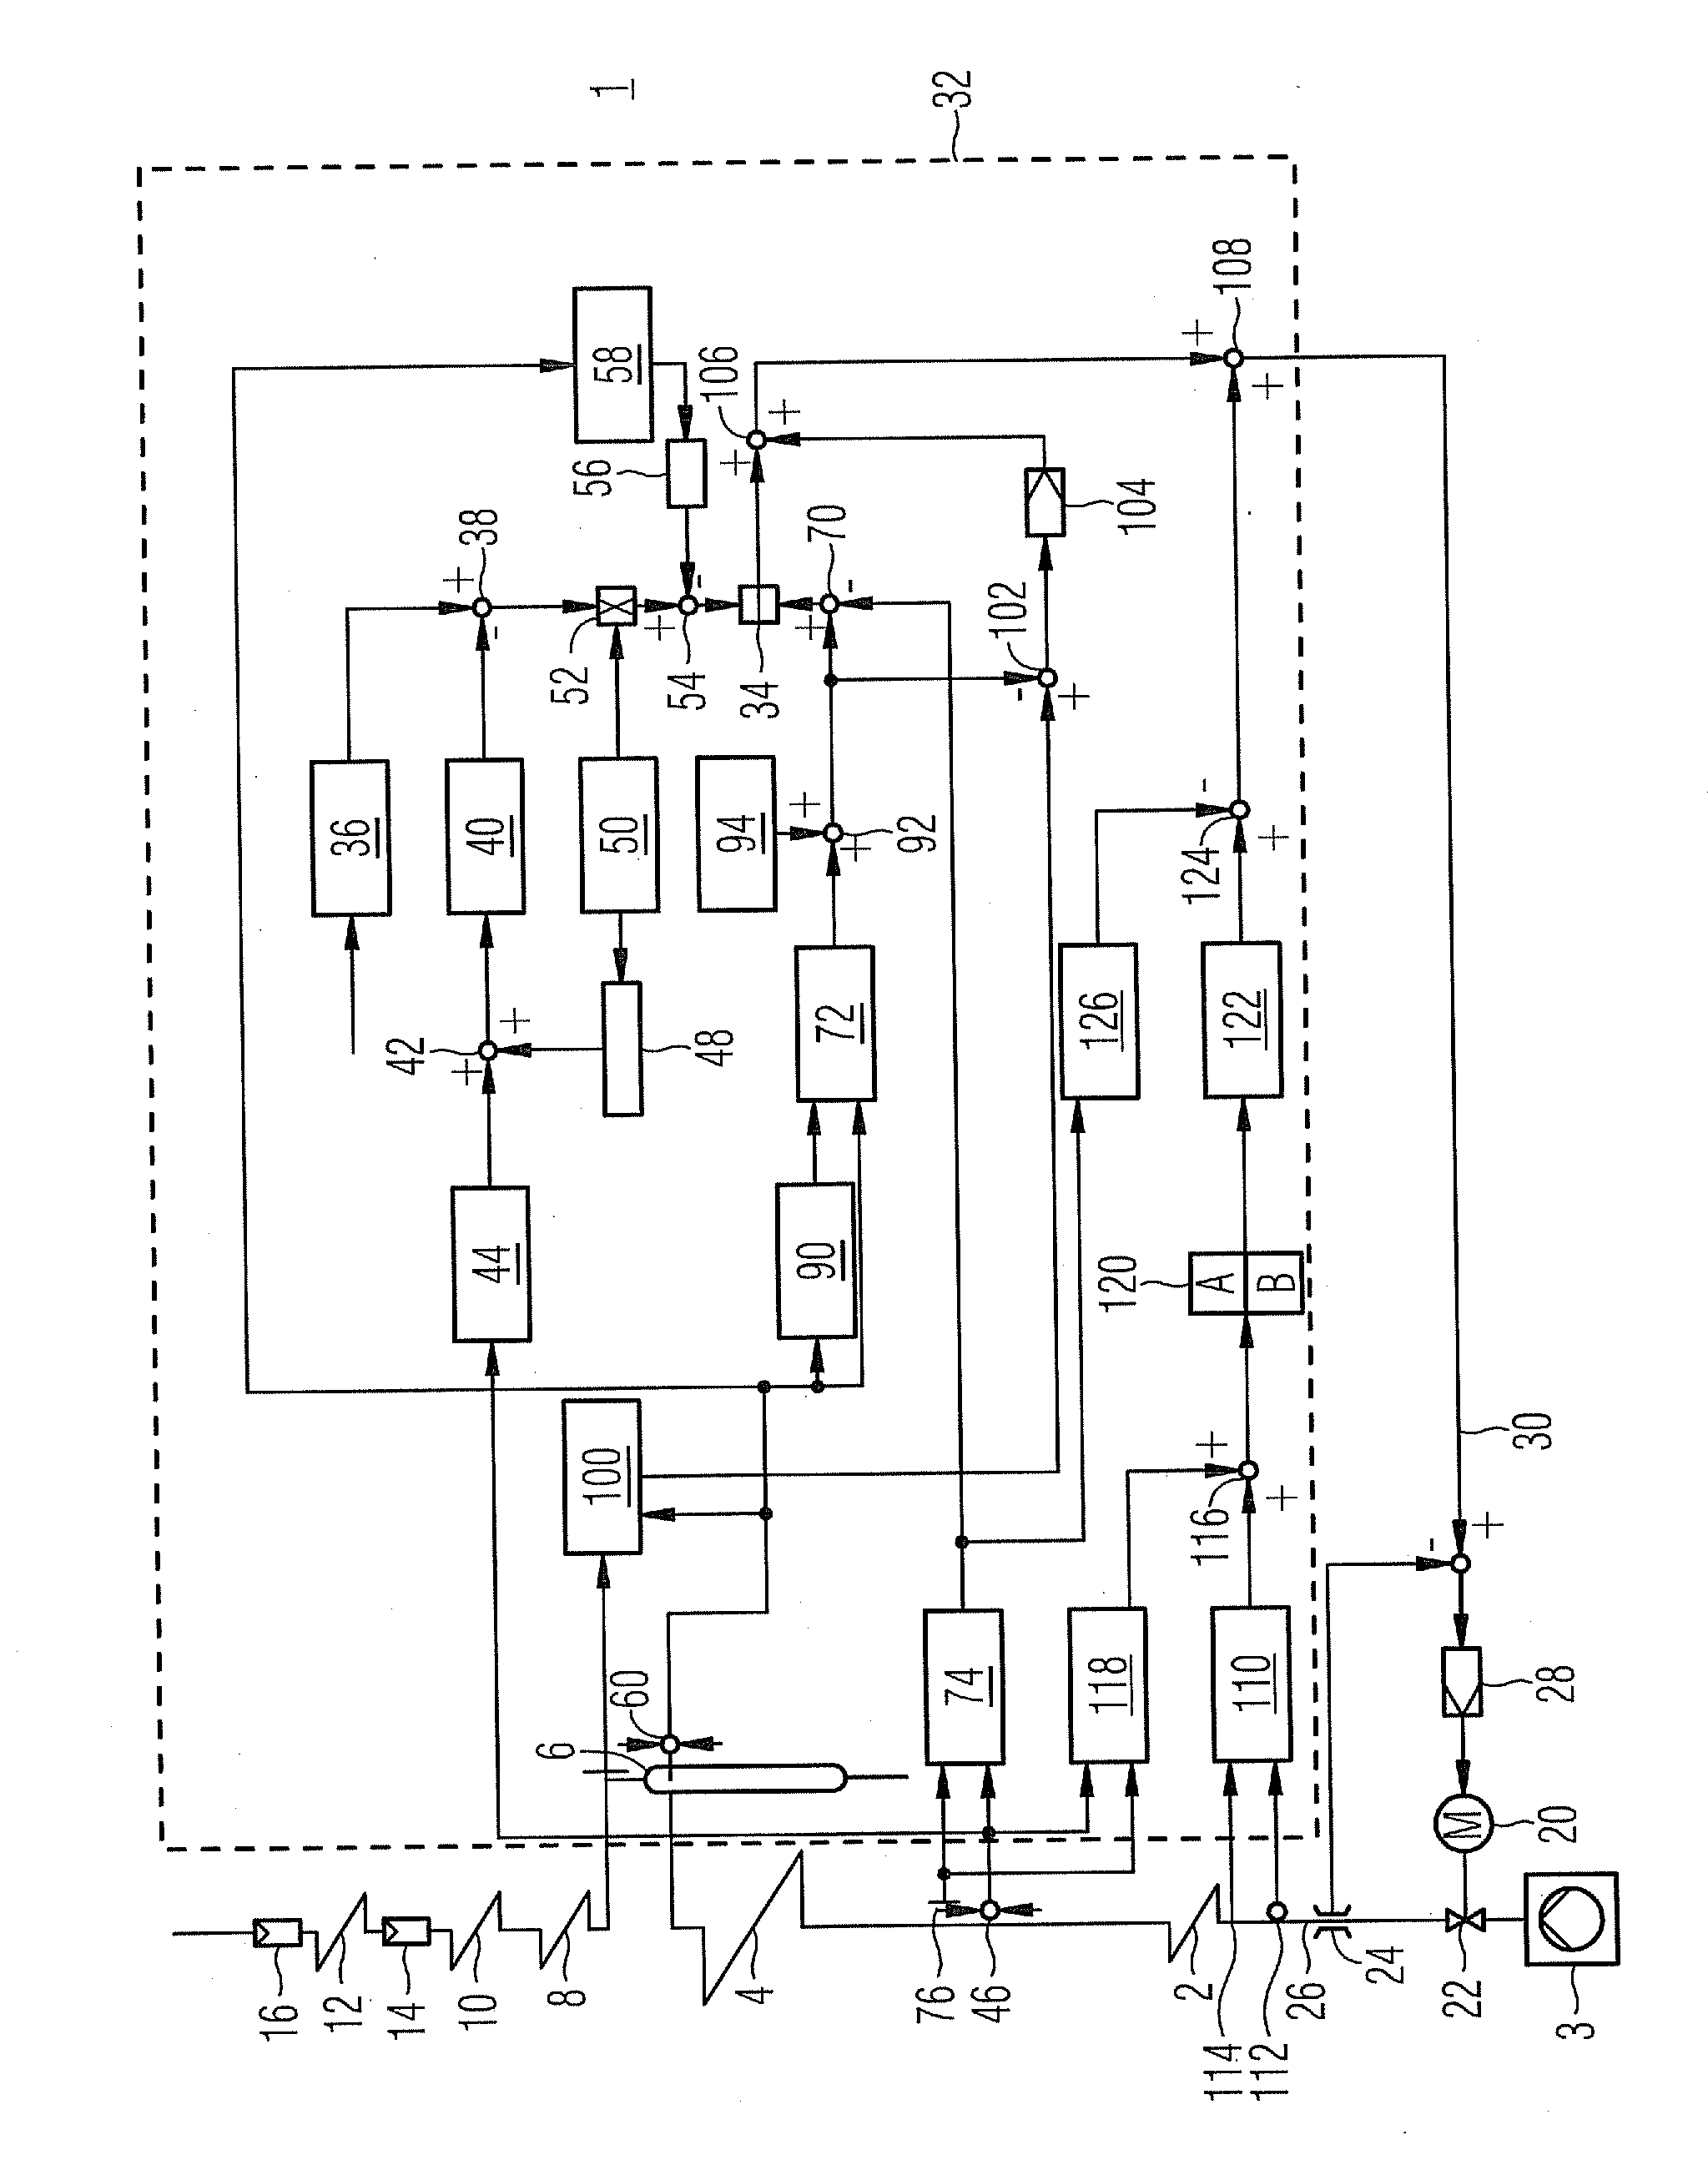 Method for operating a continuous flow steam generator